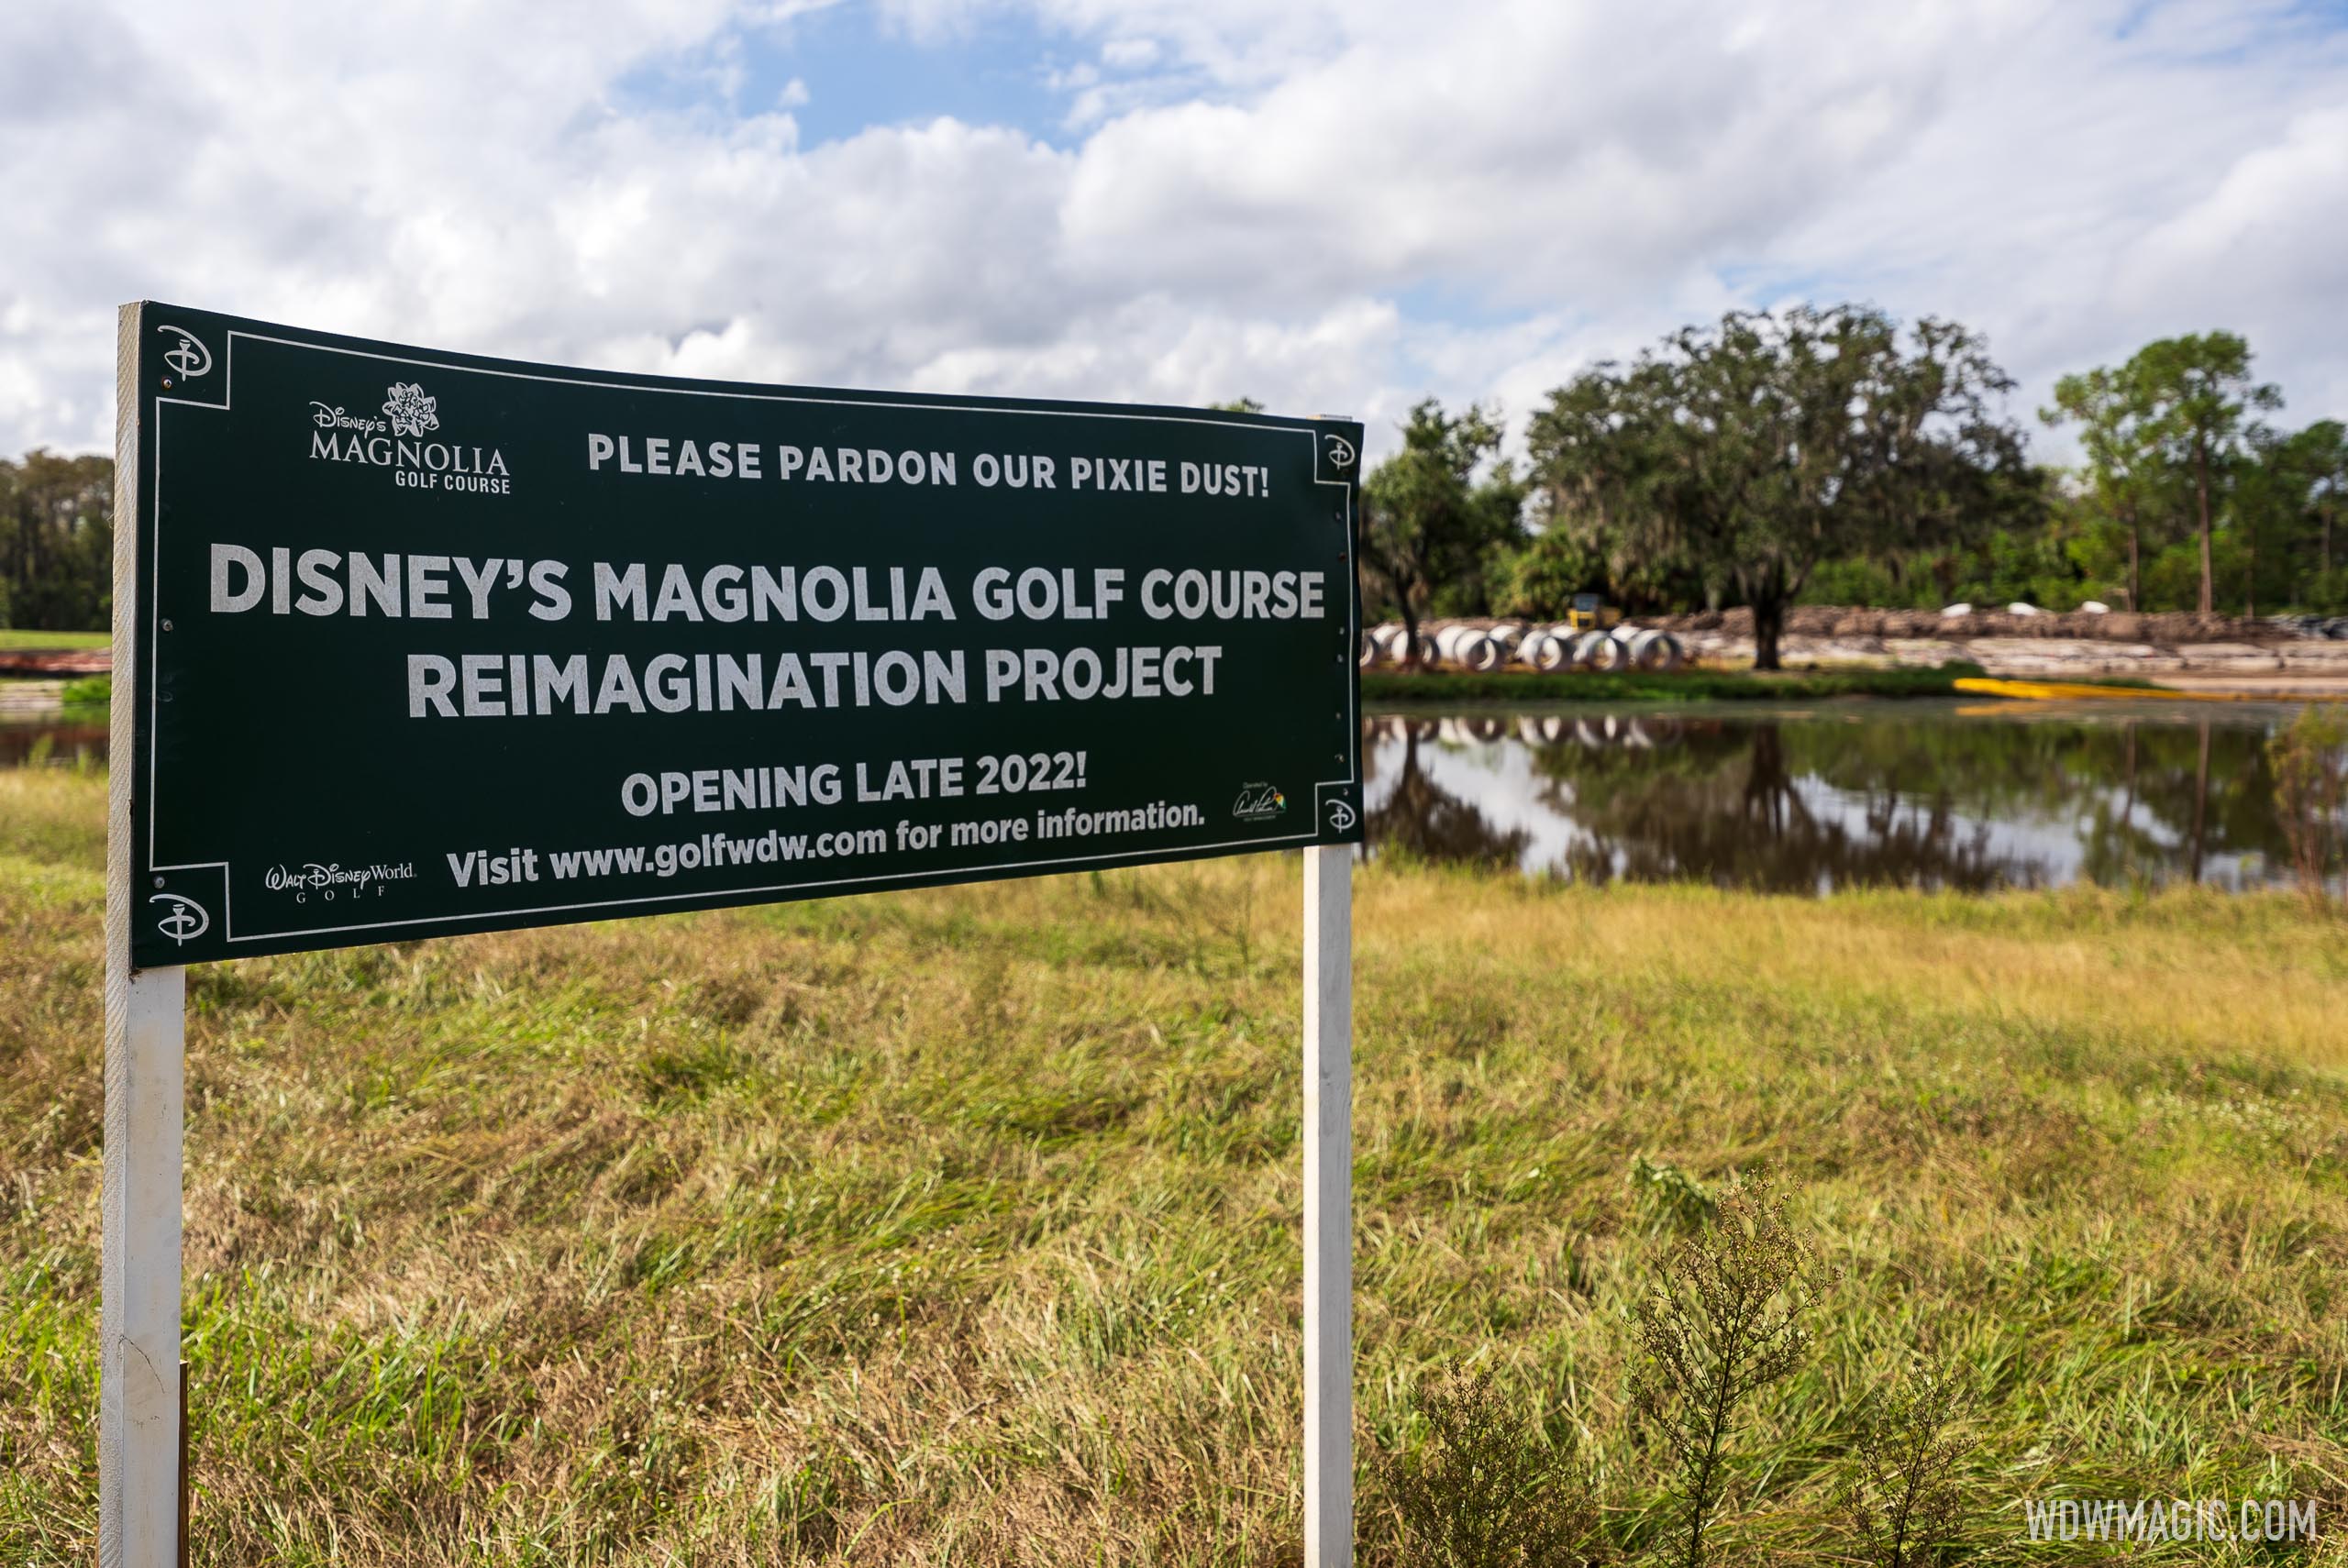 Disney's Magnolia Golf Course will partially reopen in December 2022 as a 14-hole course at a discounted rate